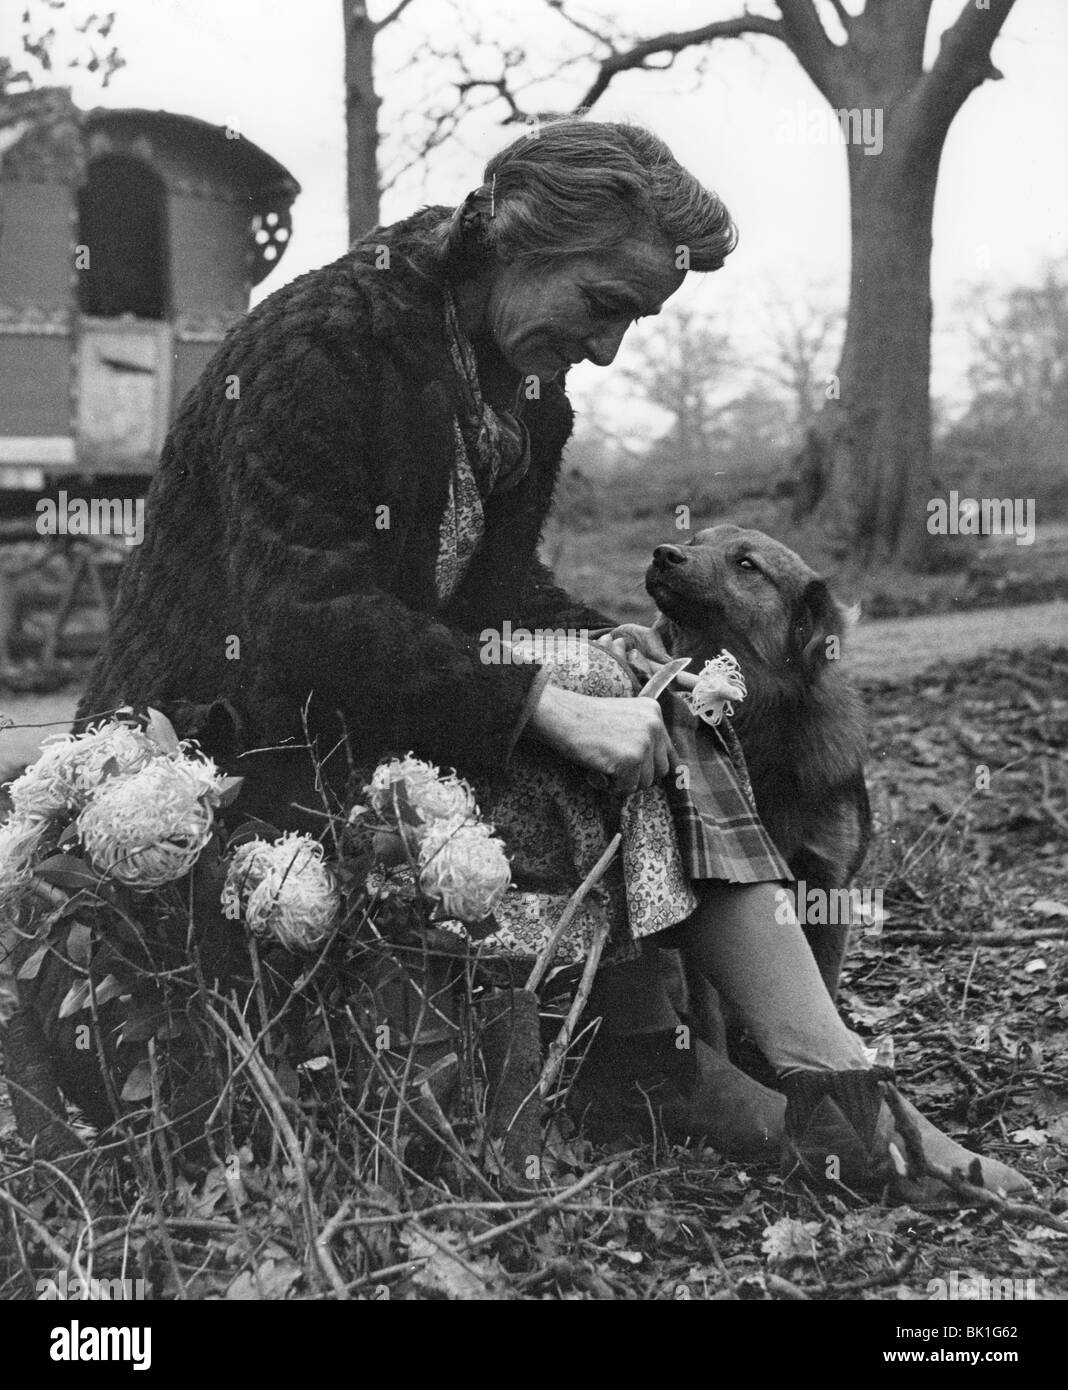 Gypsy Woman with dog, 1960. Banque D'Images